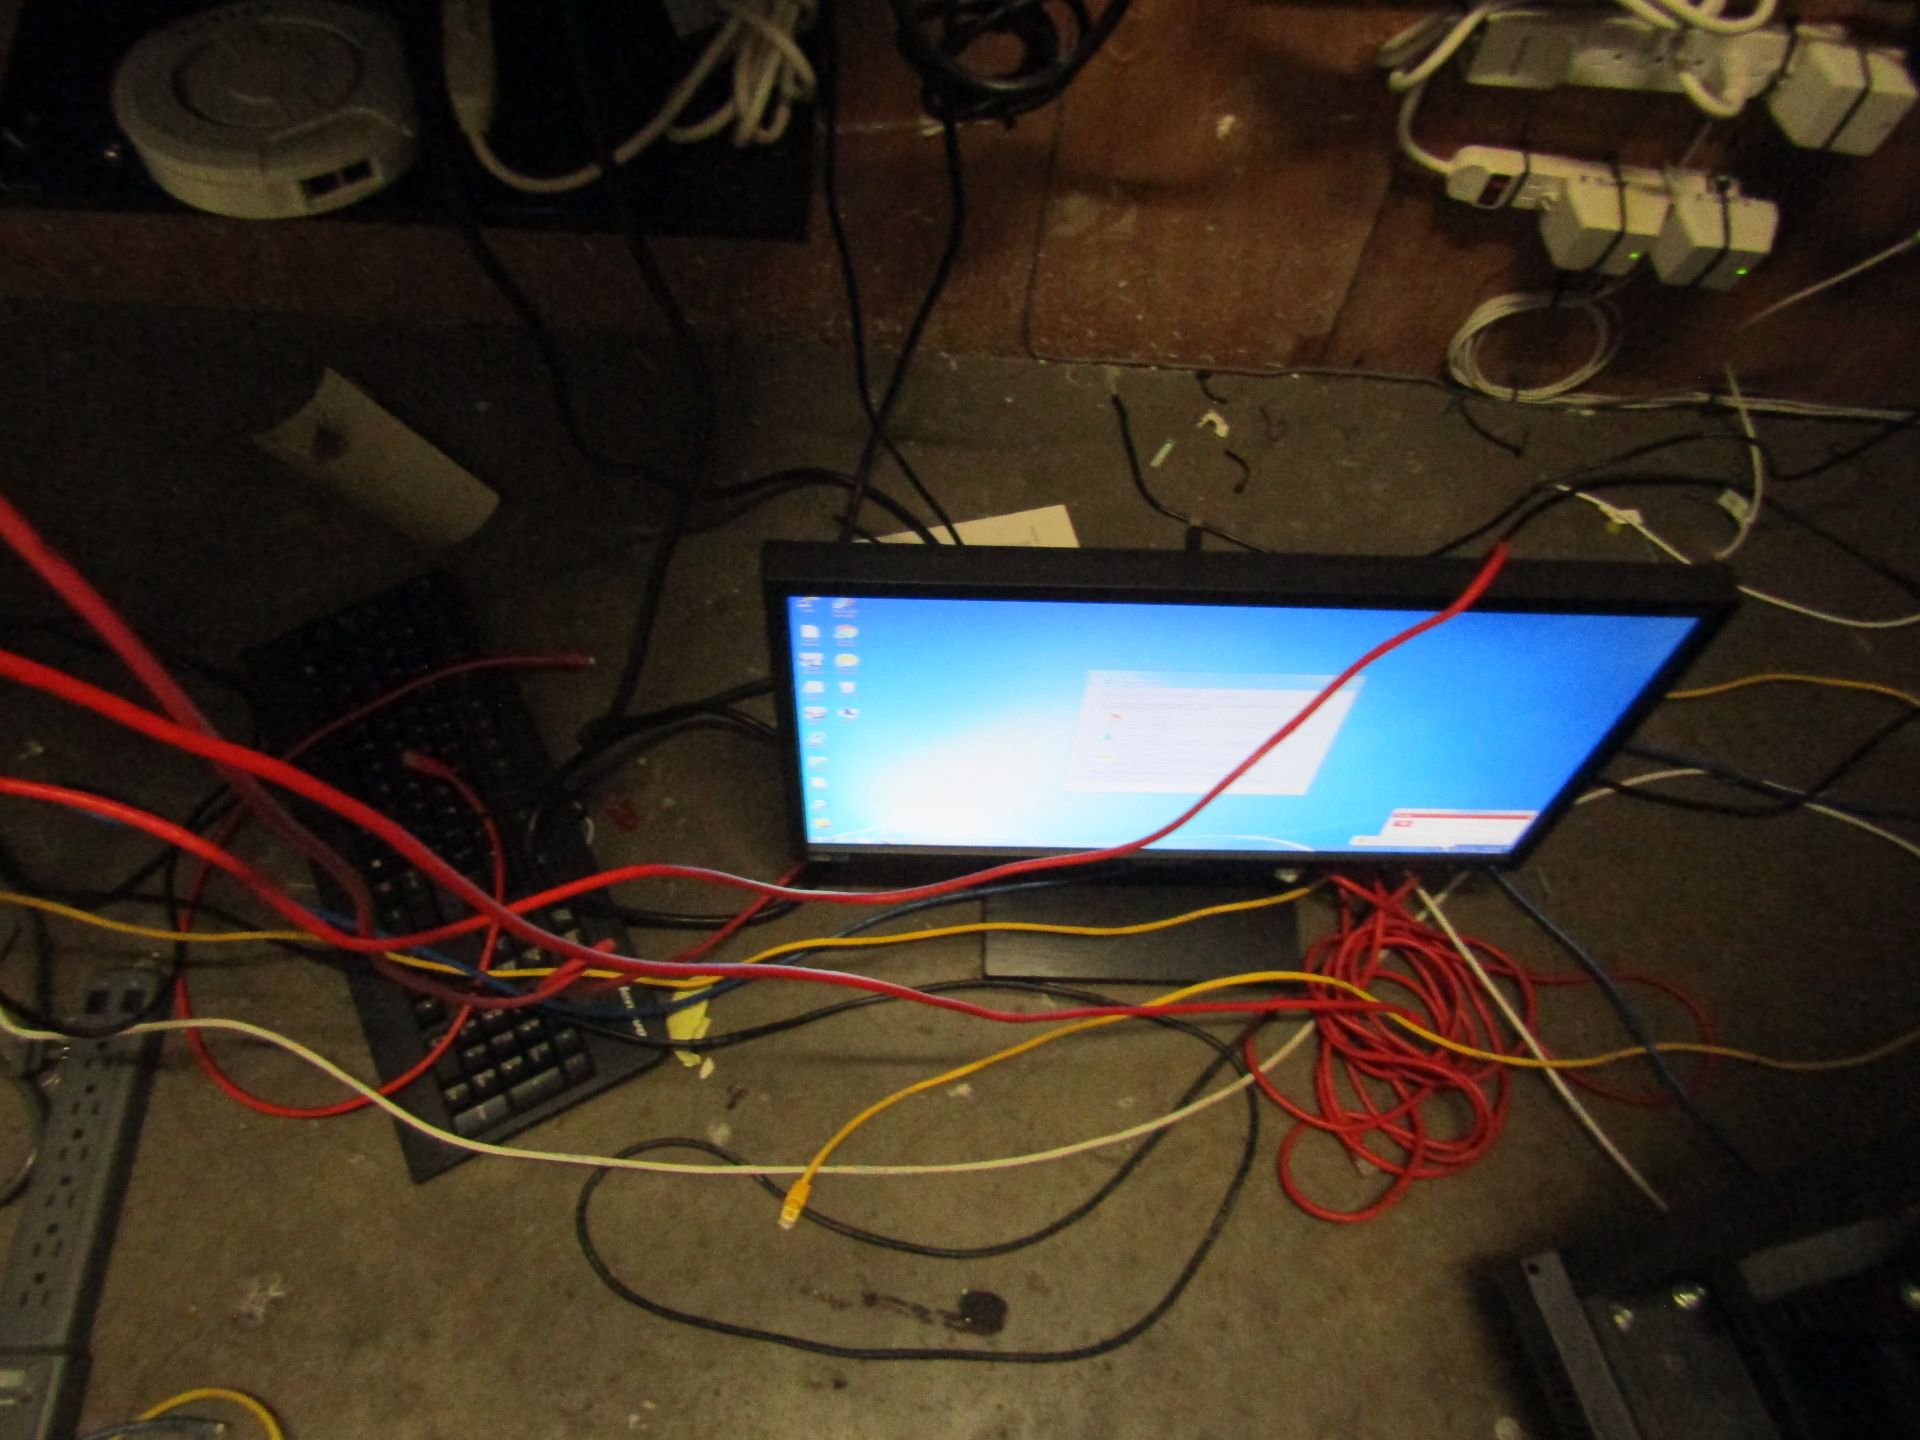 Contents of Server Room to Include But Not Limited to (No Alarm or Structural Items): Electrical - Image 4 of 10